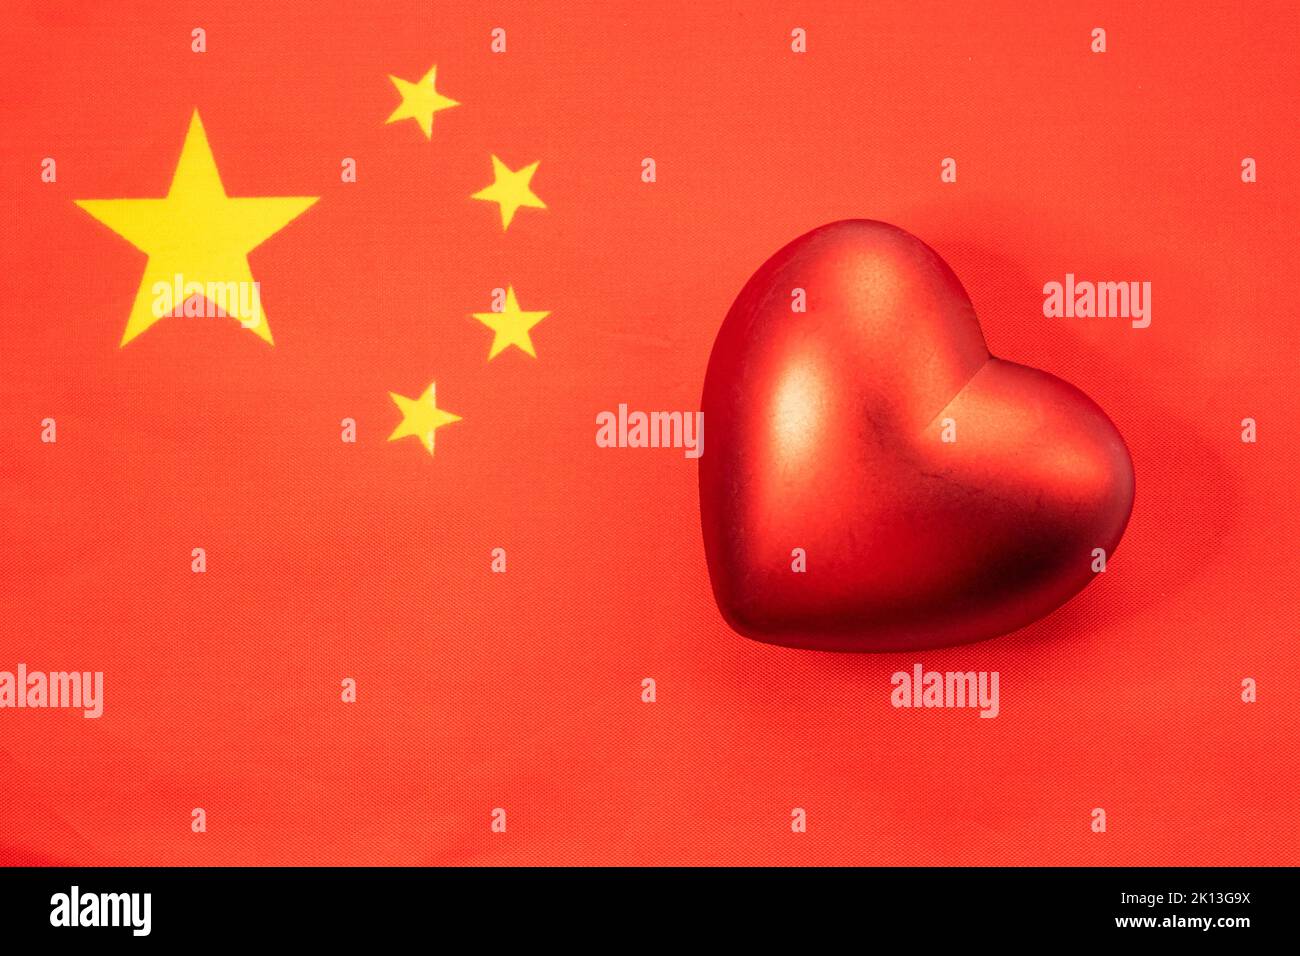 The red heart is on the flag of China. The concept of patriotic feelings for one's state. Patriotism Stock Photo